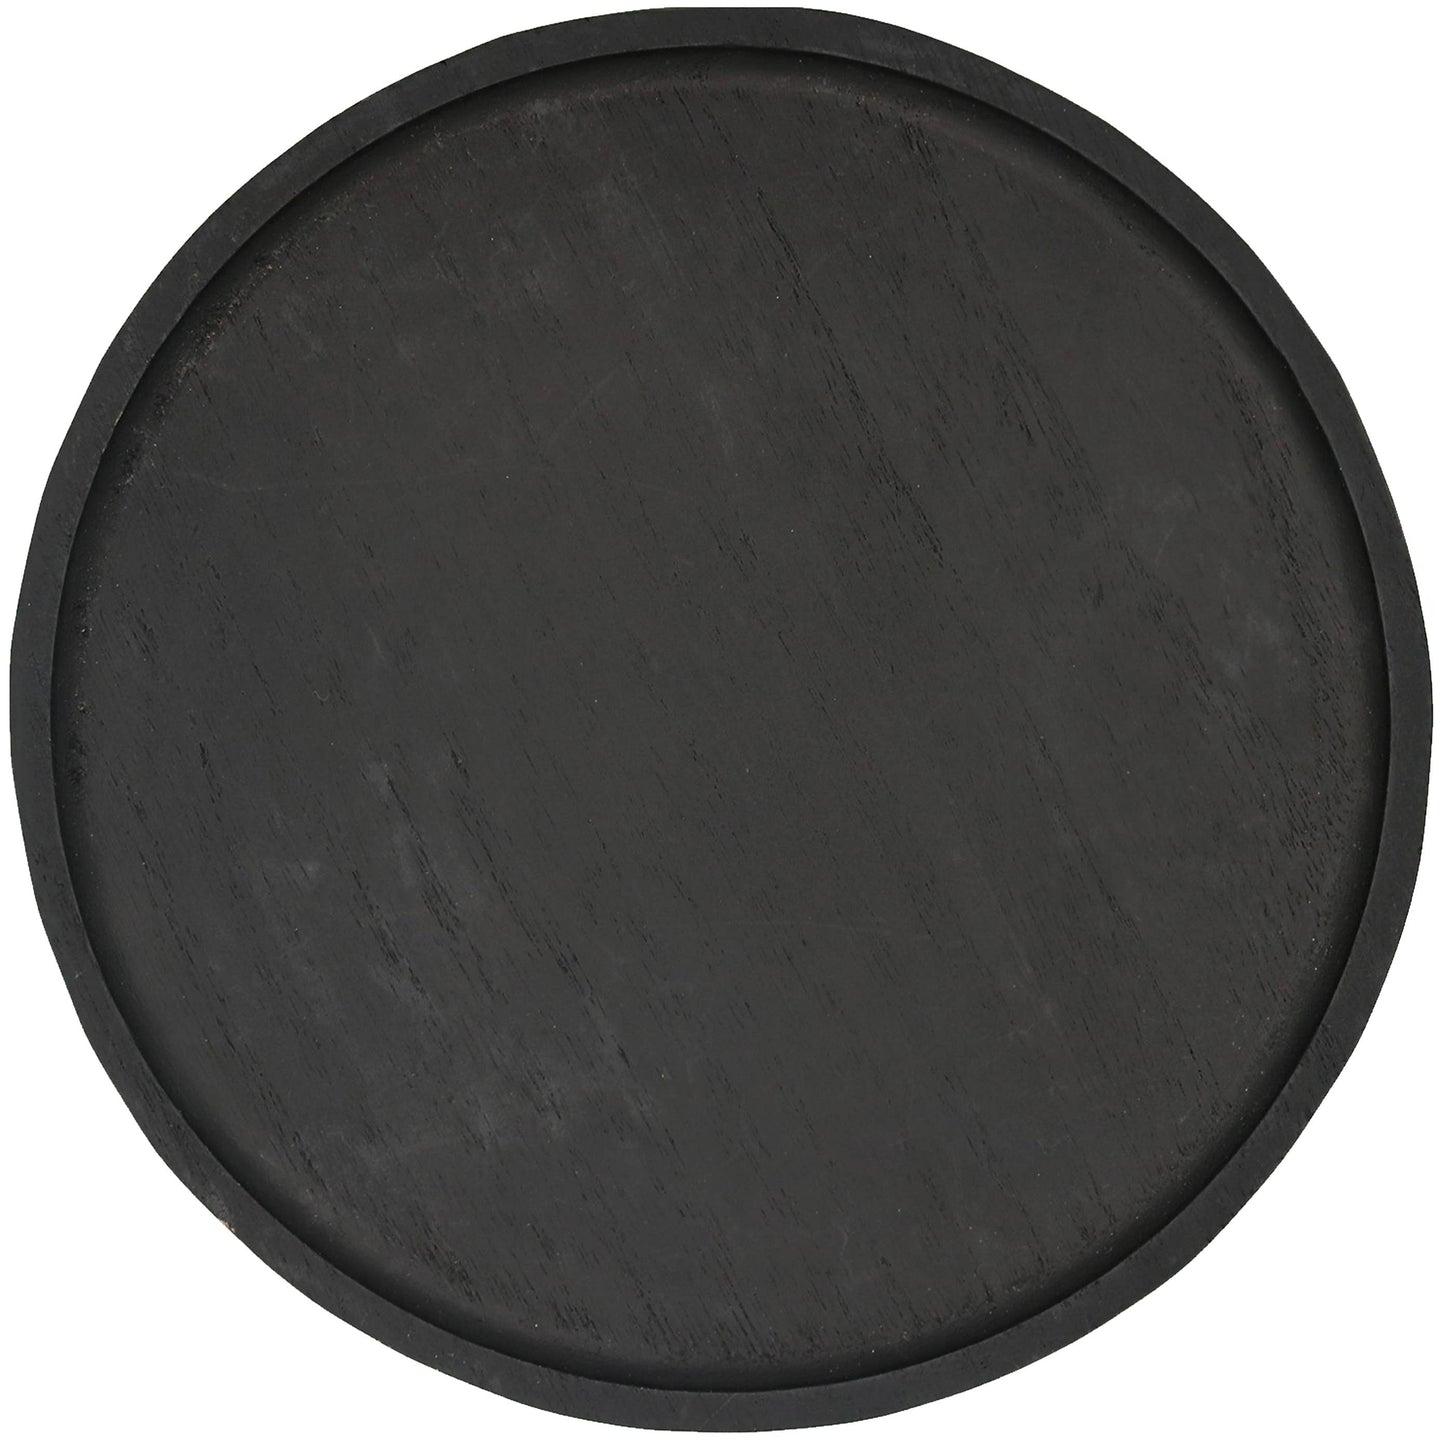 Large Black Round Wood Tray - Home Decor & Gifts